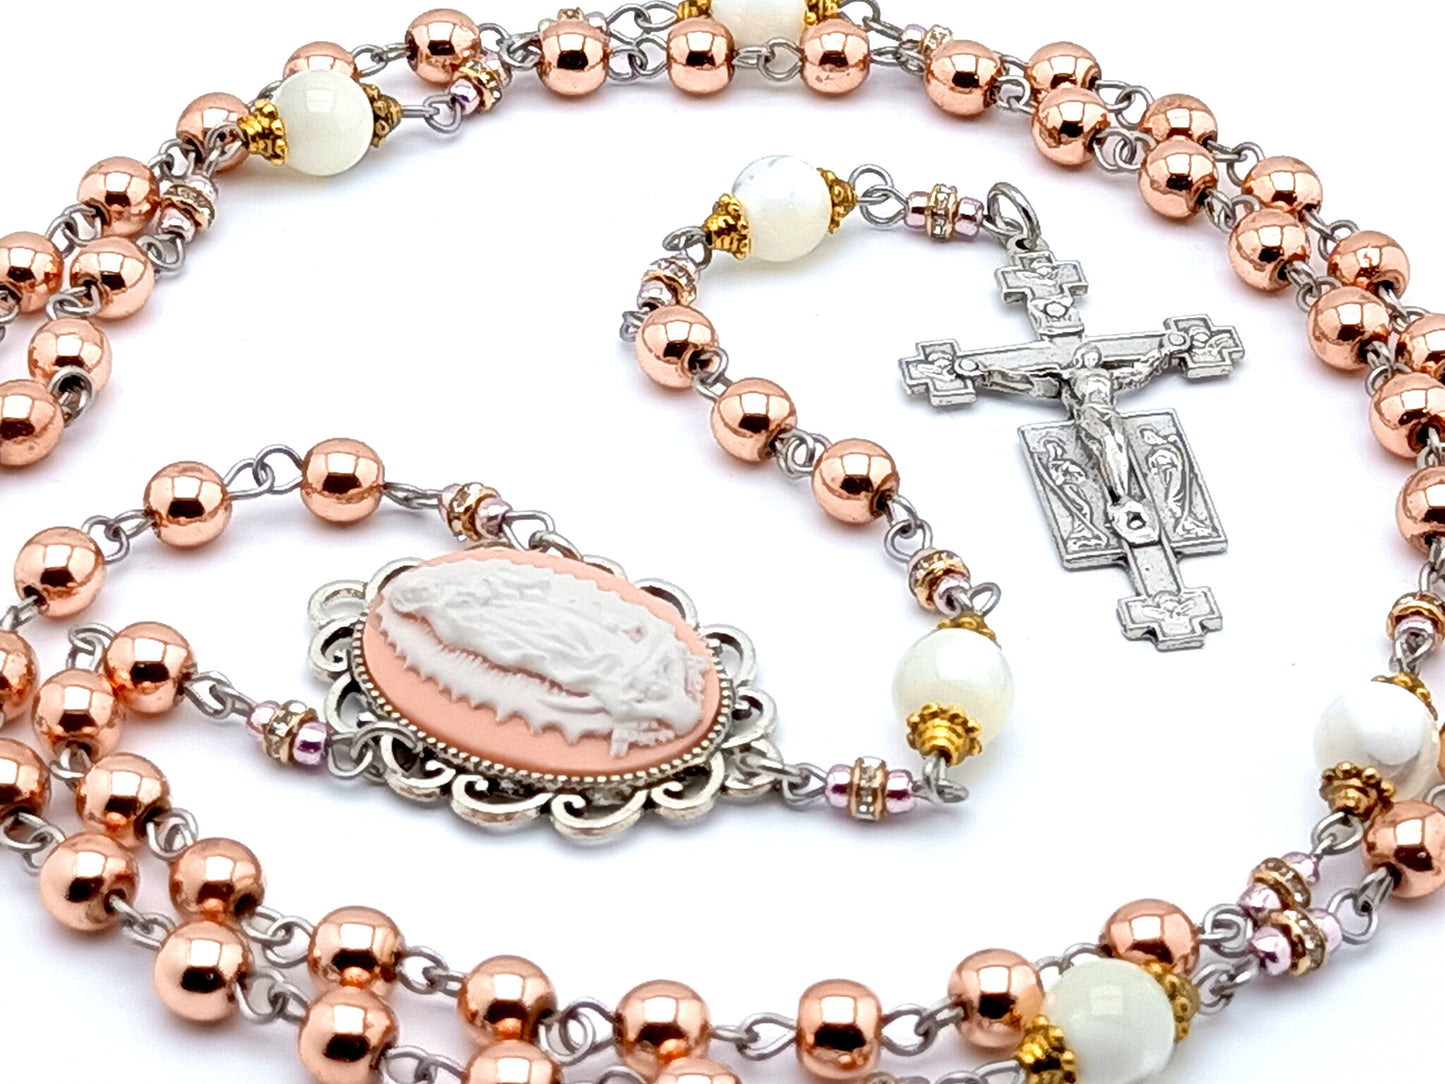 Our Lady of Guadalupe cameo unique rosary beads with rose gold hematite gemstone and mother of pearl beads and Holy Angel crucifix.